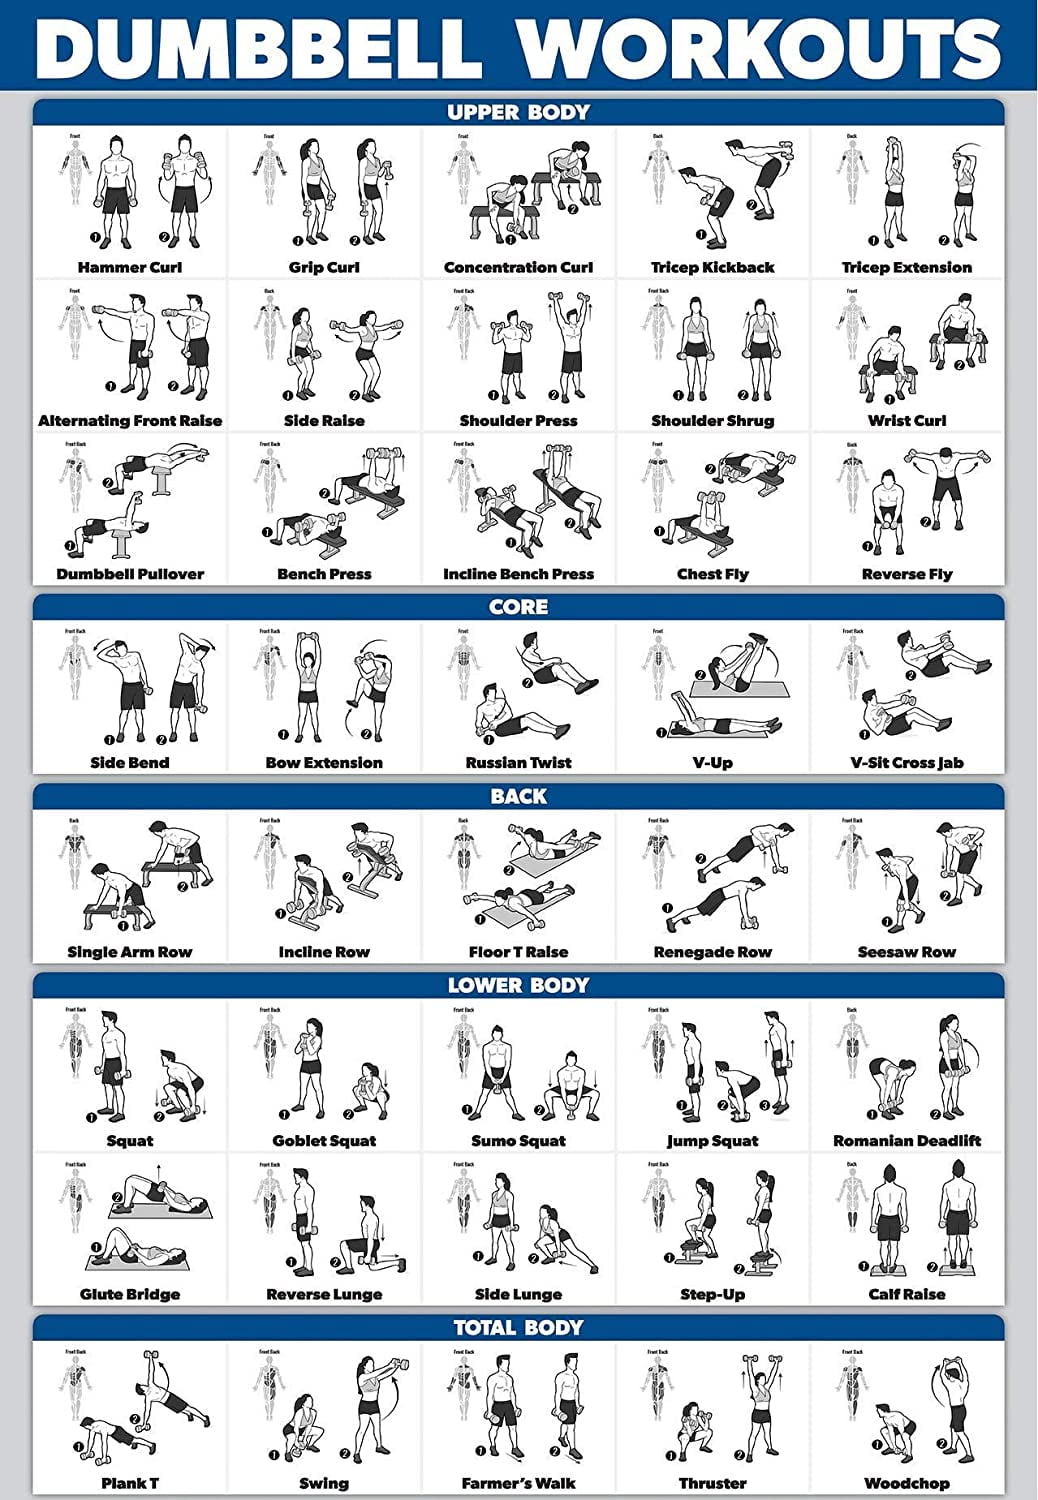 Yoga Poses Posters Volume 1 Foam Roller Exercise & Stretching Chart Palace Learning 4 Pack 2 & 3